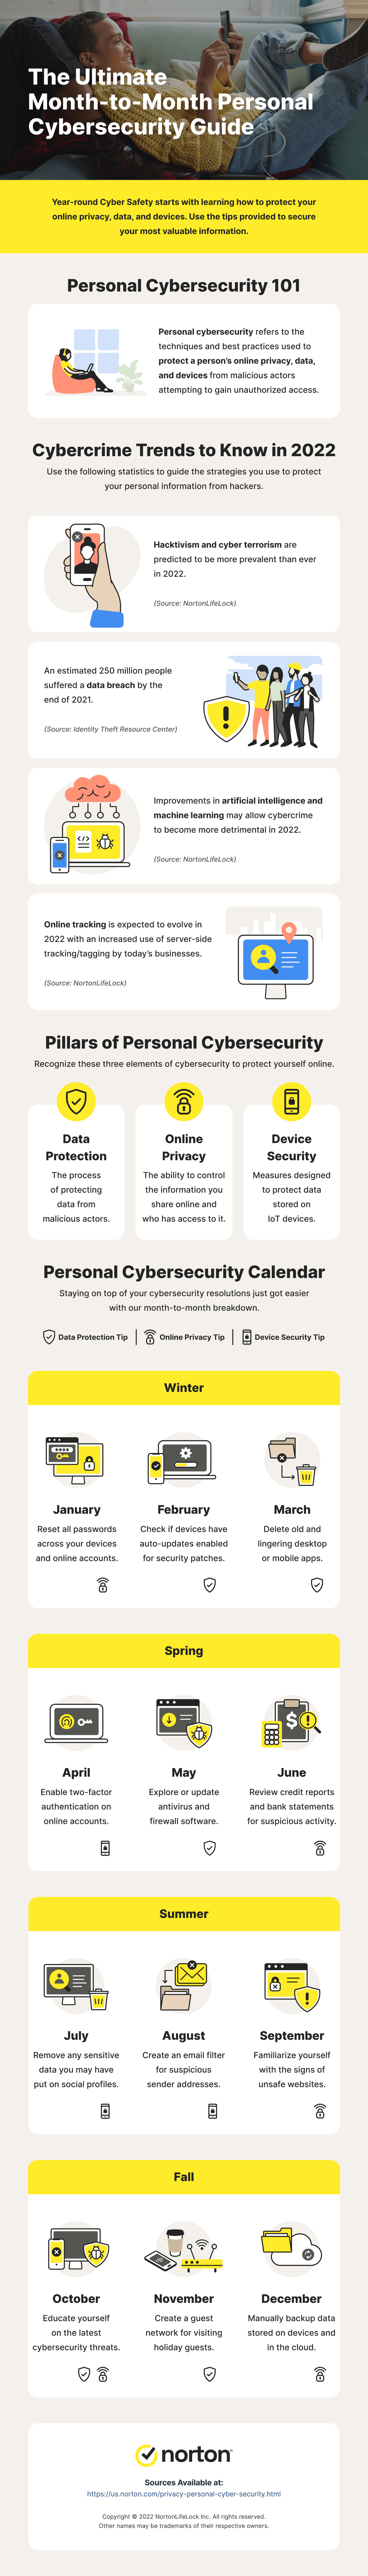 personal-cybersecurity-guide by Norton